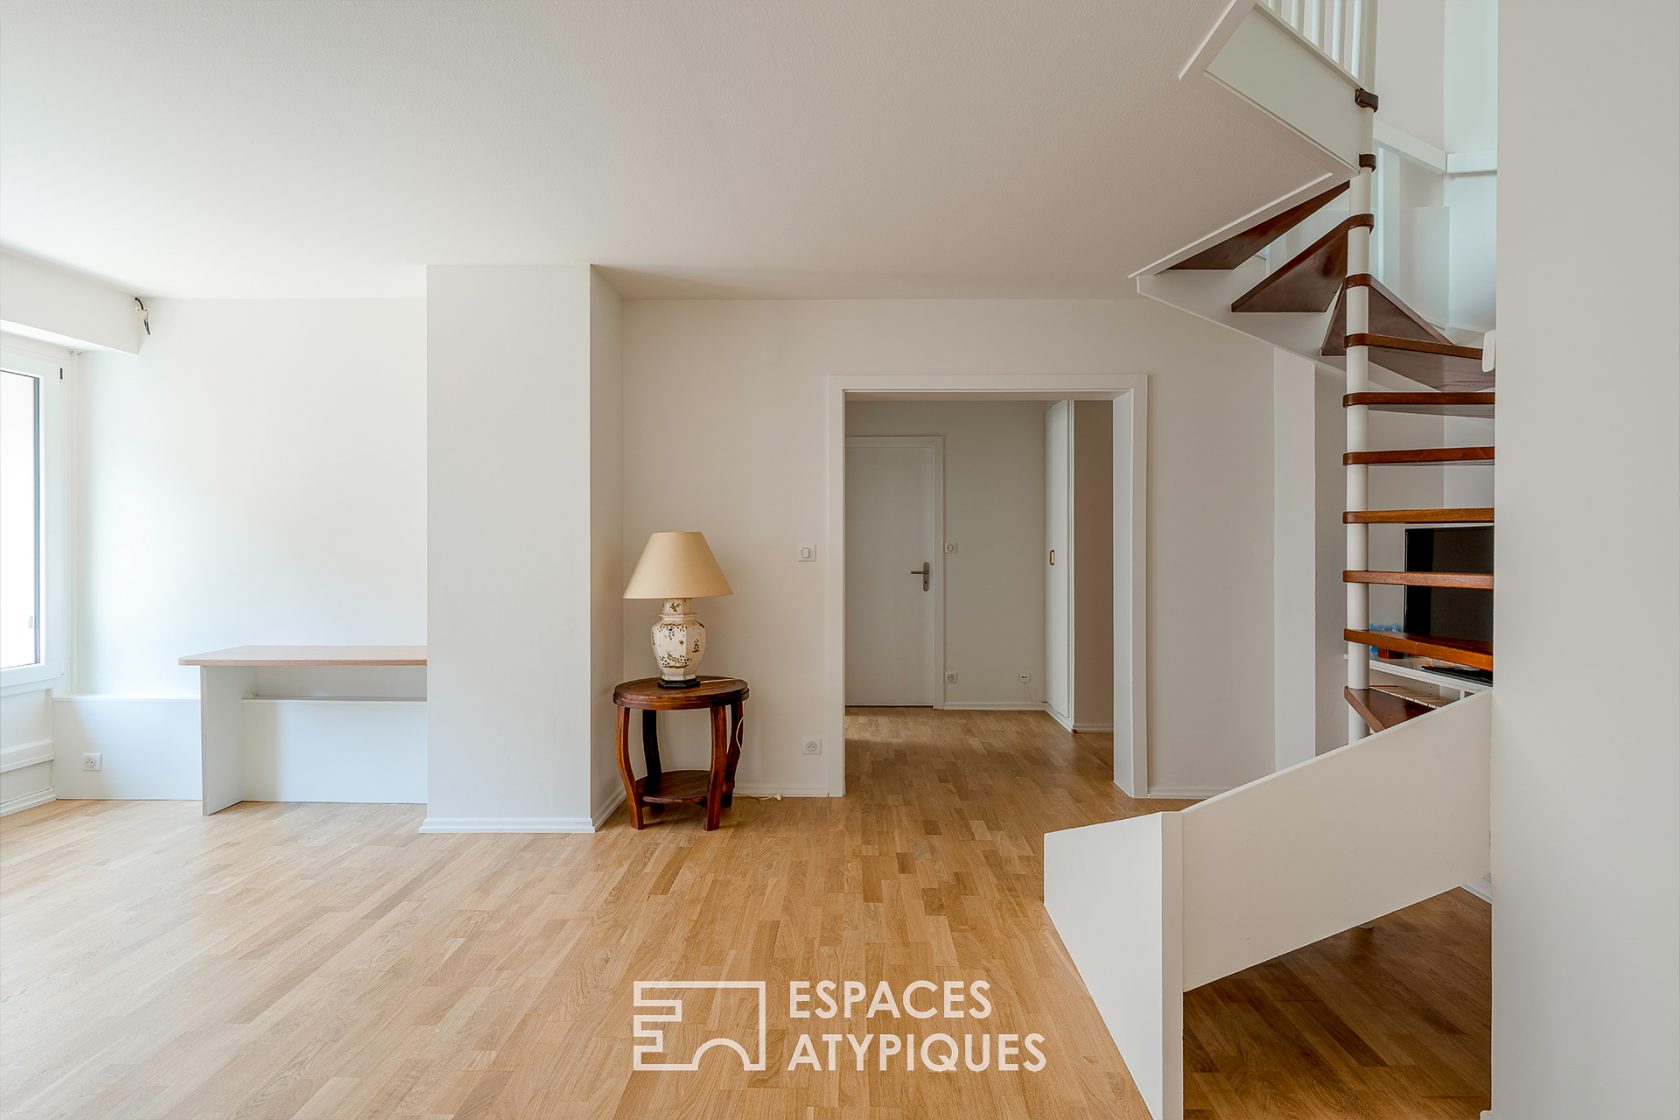 Renovated maisonette apartment with terrace in the city centre